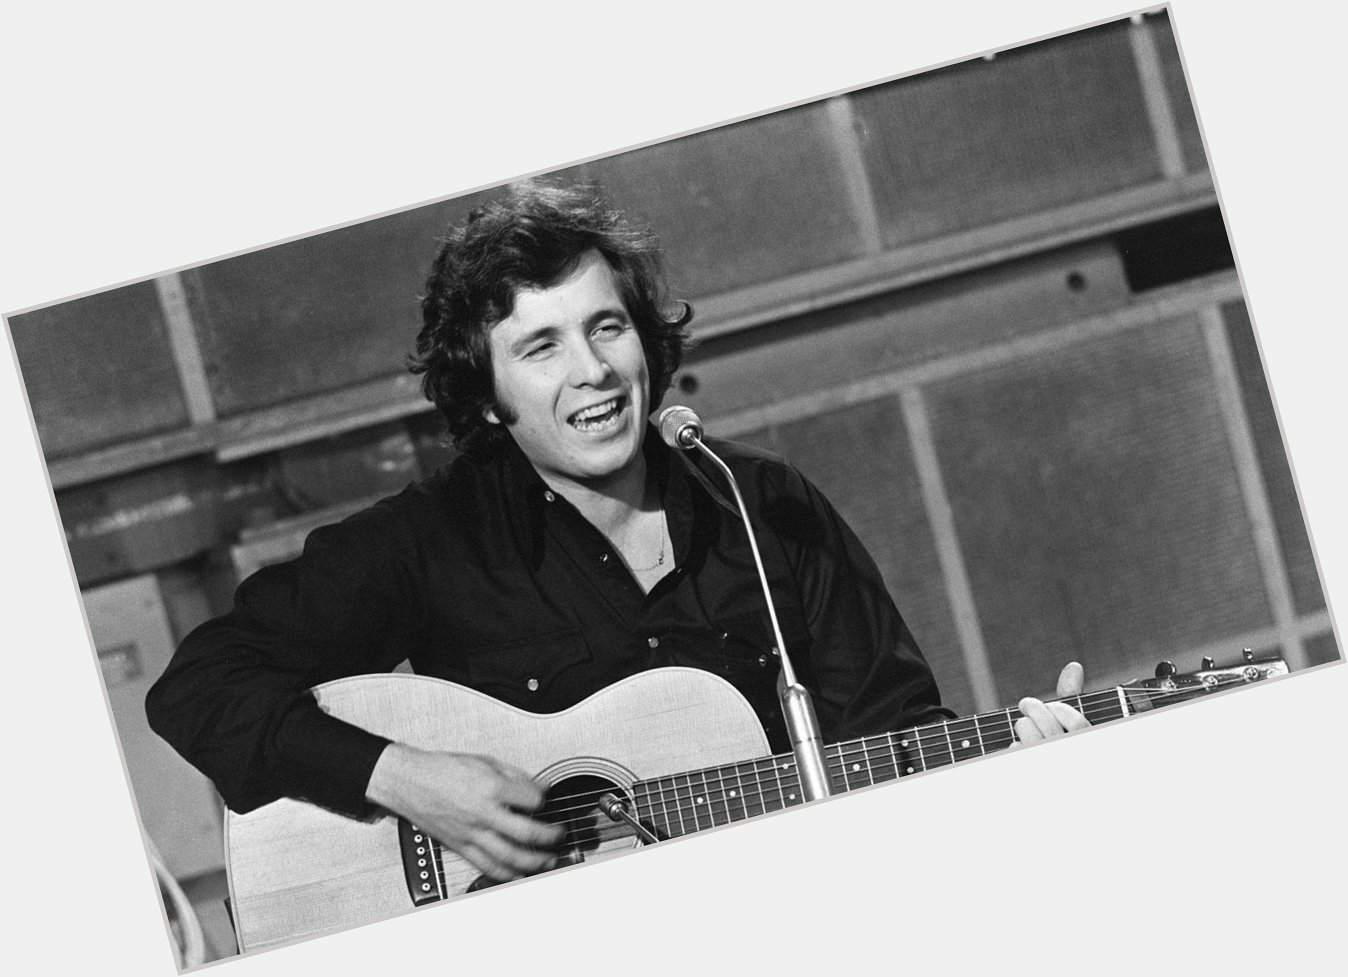 Happy birthday to Don McLean! 